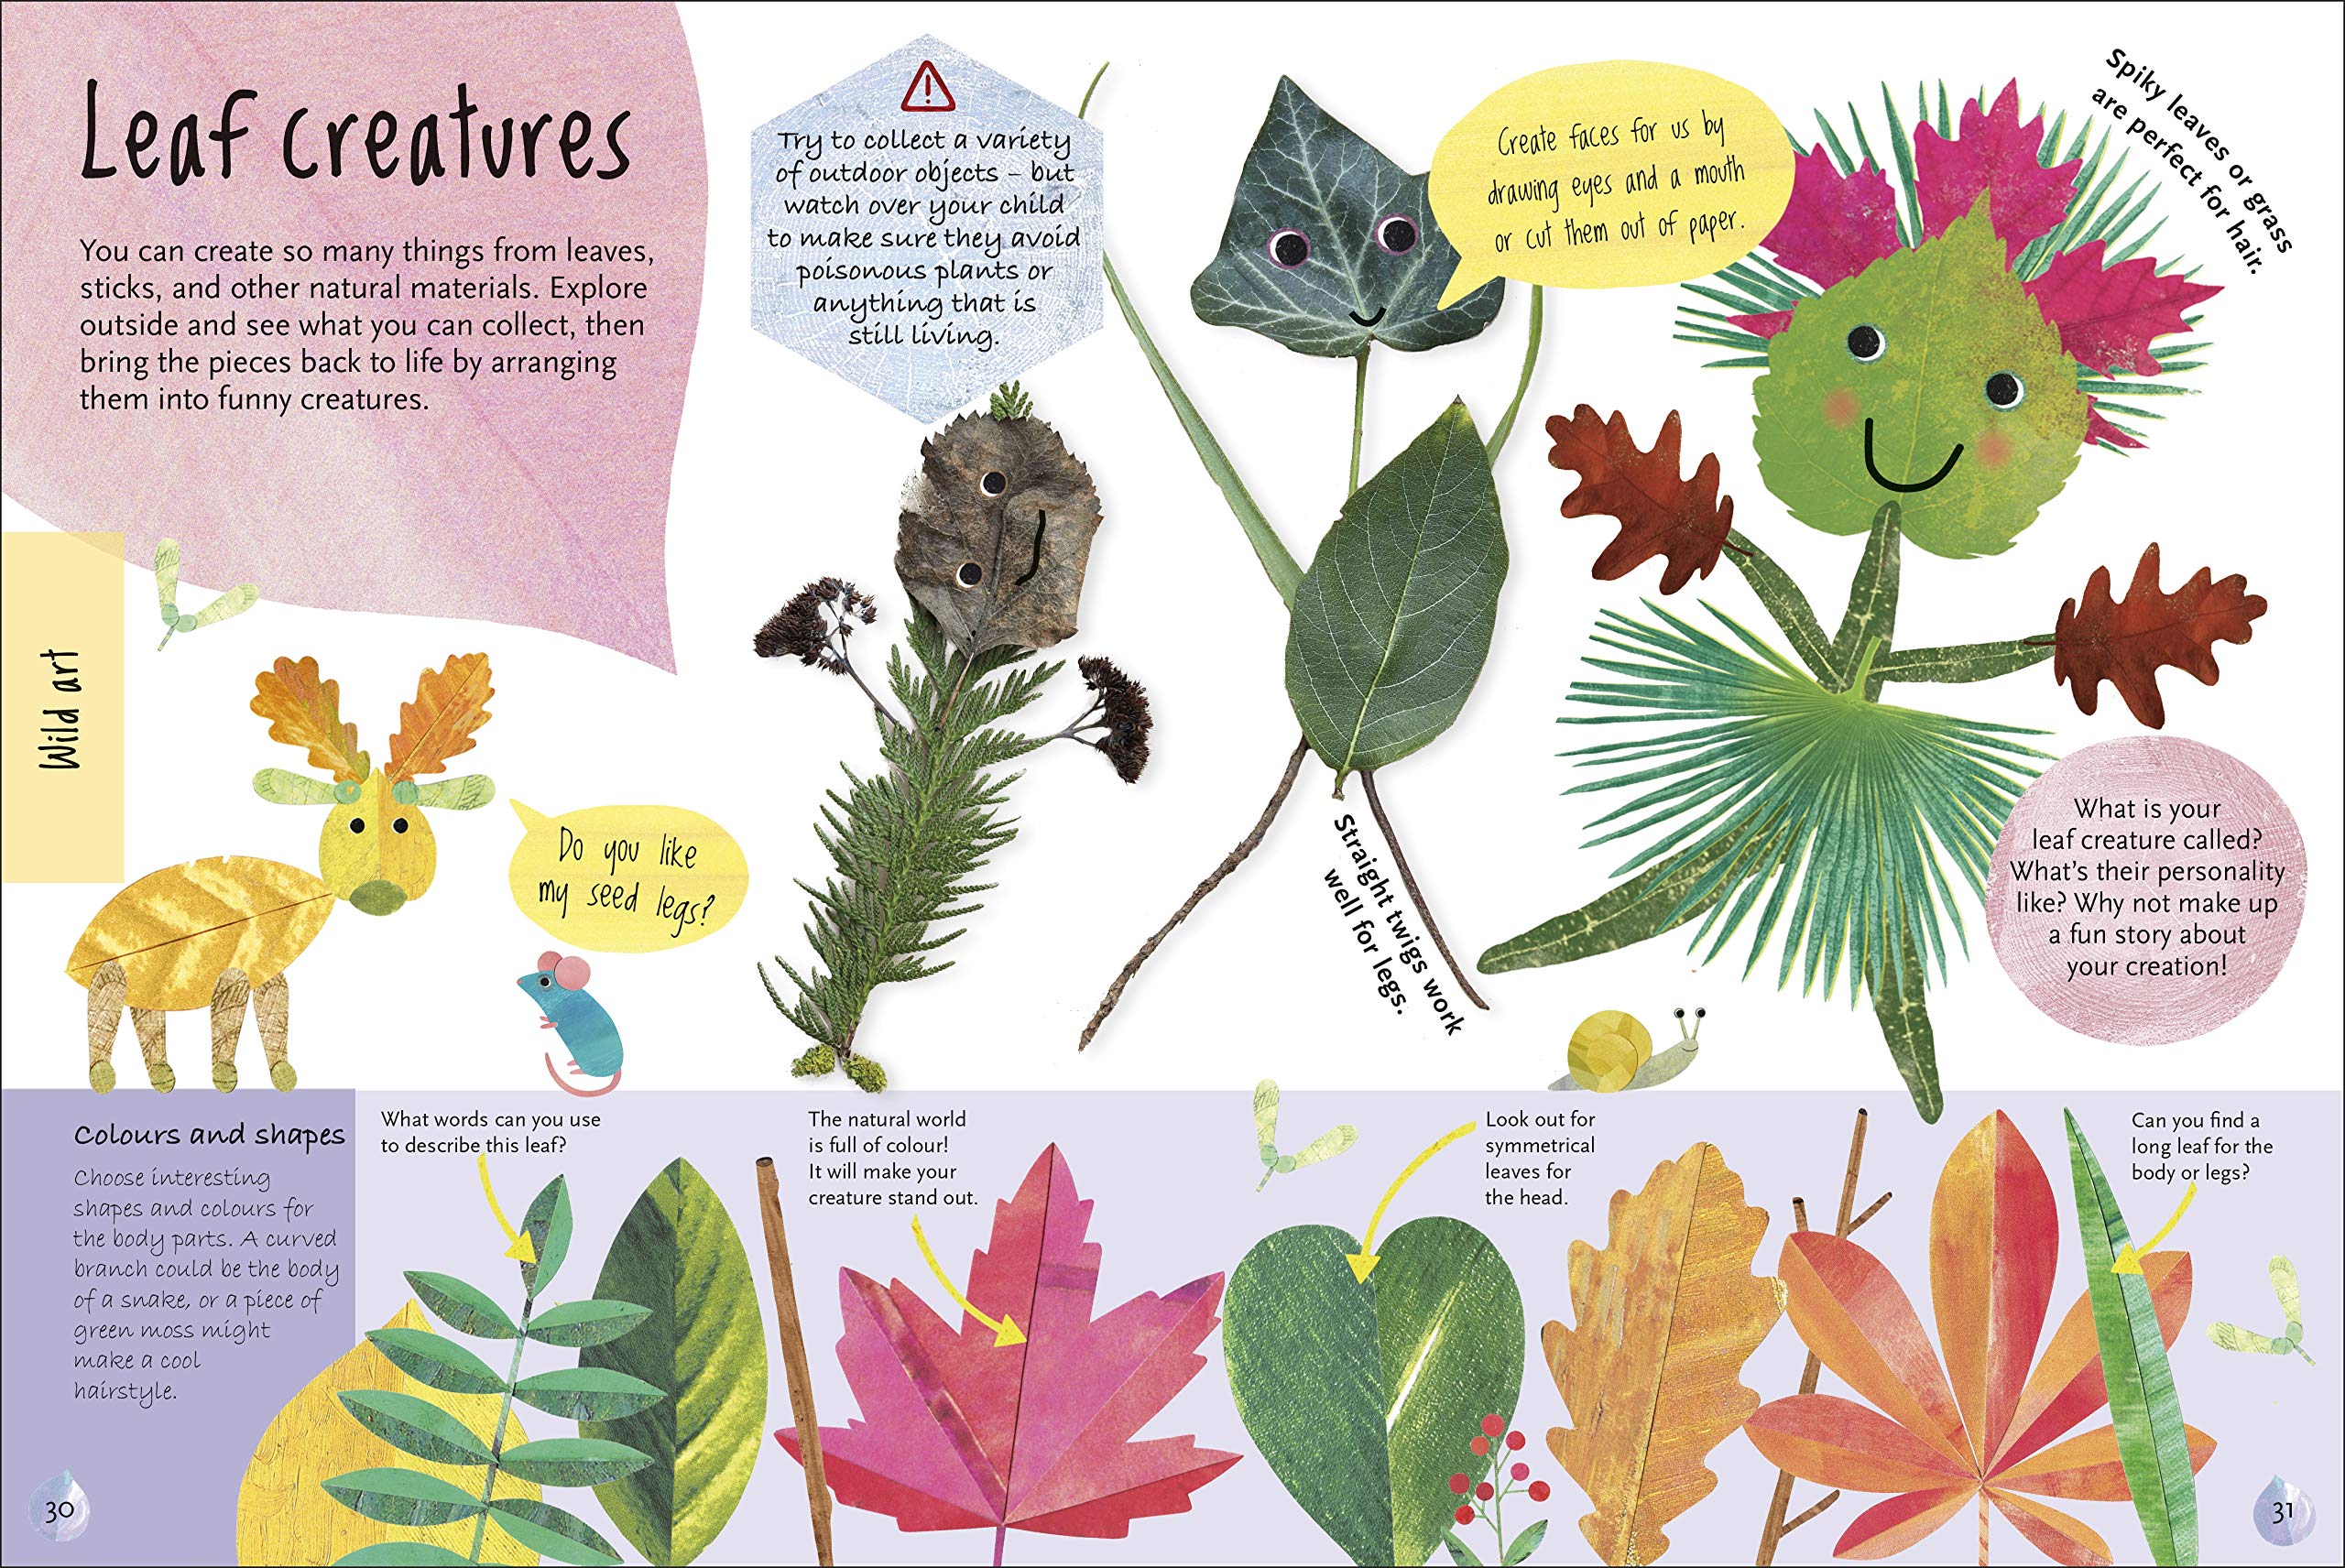 The Nature Adventure Book: 40 activities to do outdoors